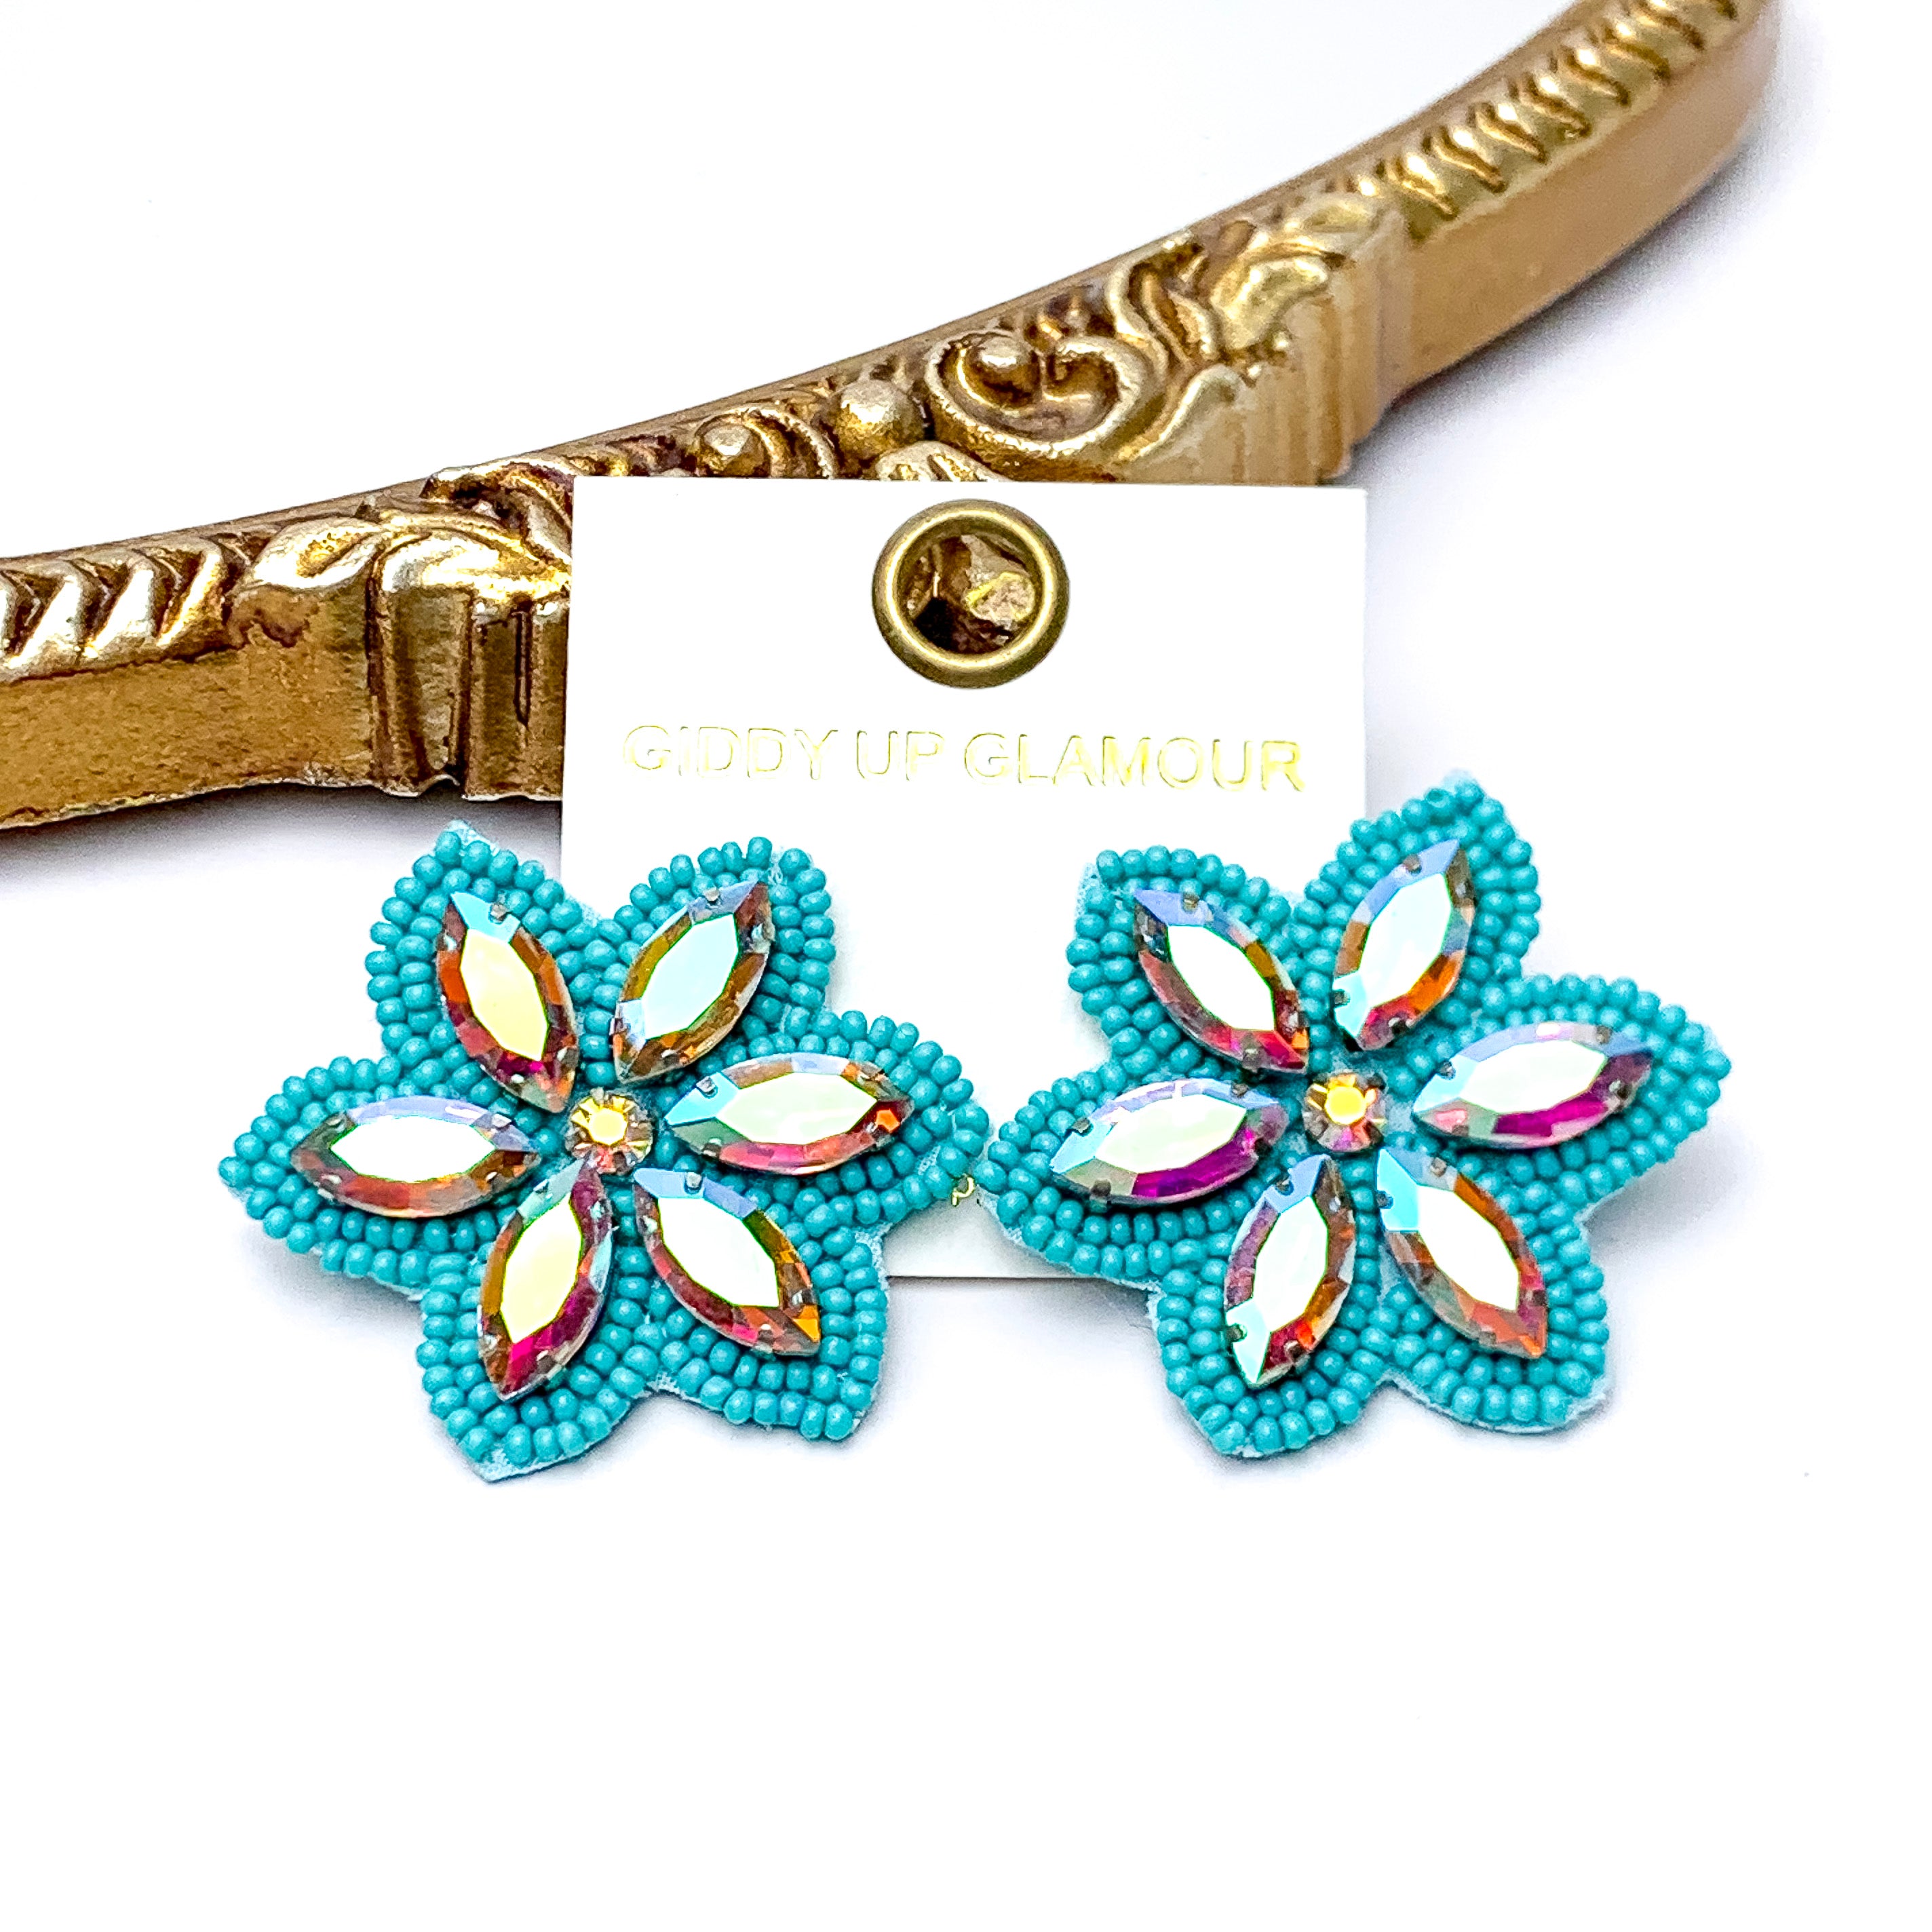 Prismatic Petals Seed Bead Flower Stud Earrings with AB stones in Turquoise